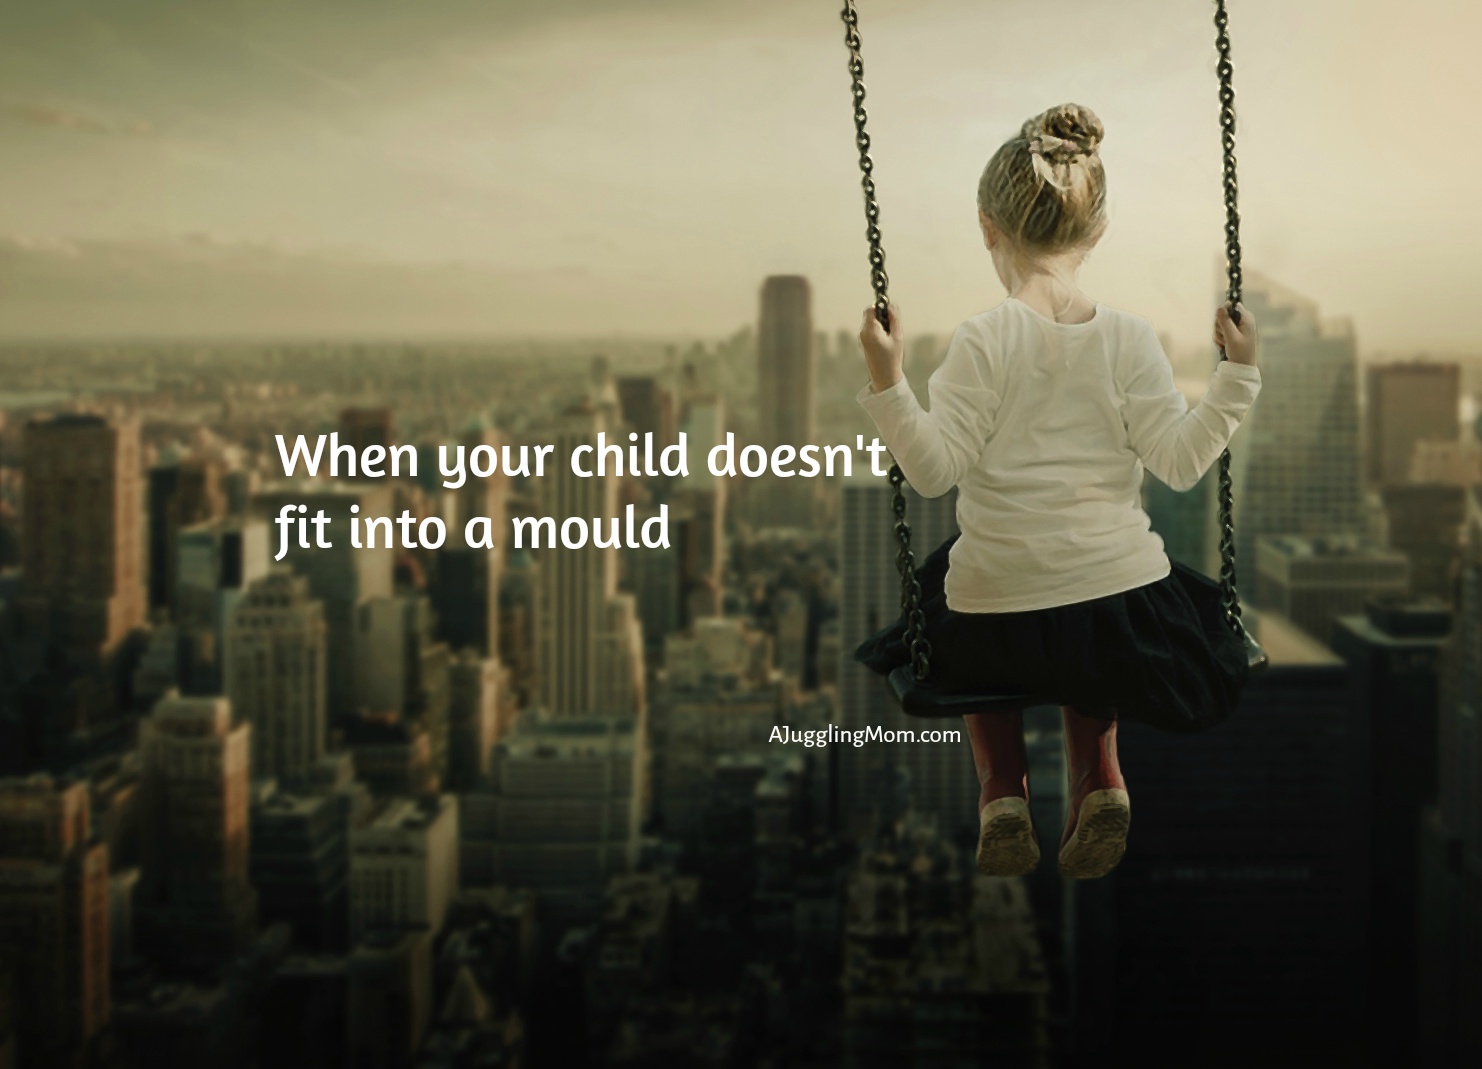 When your child doesn't fit into a mould - A Juggling Mom